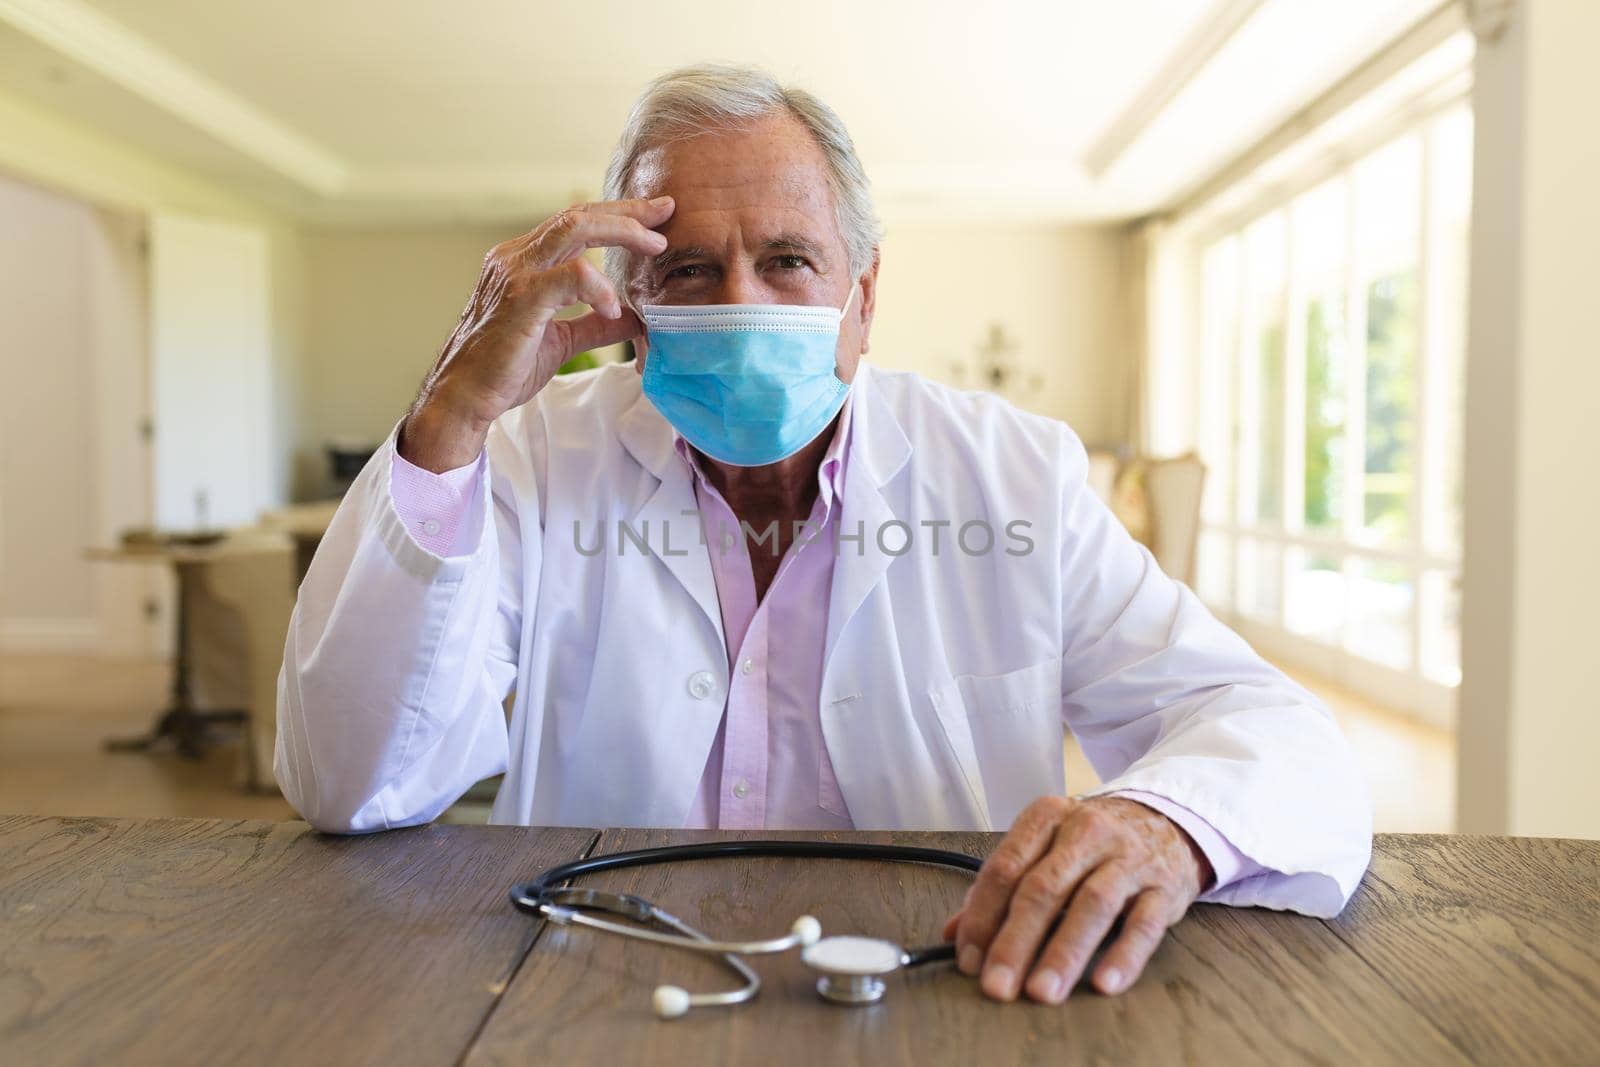 Senior caucasian male doctor wearing face mask having a video call. medicine and healthcare services during covid 19 pandemic concept.